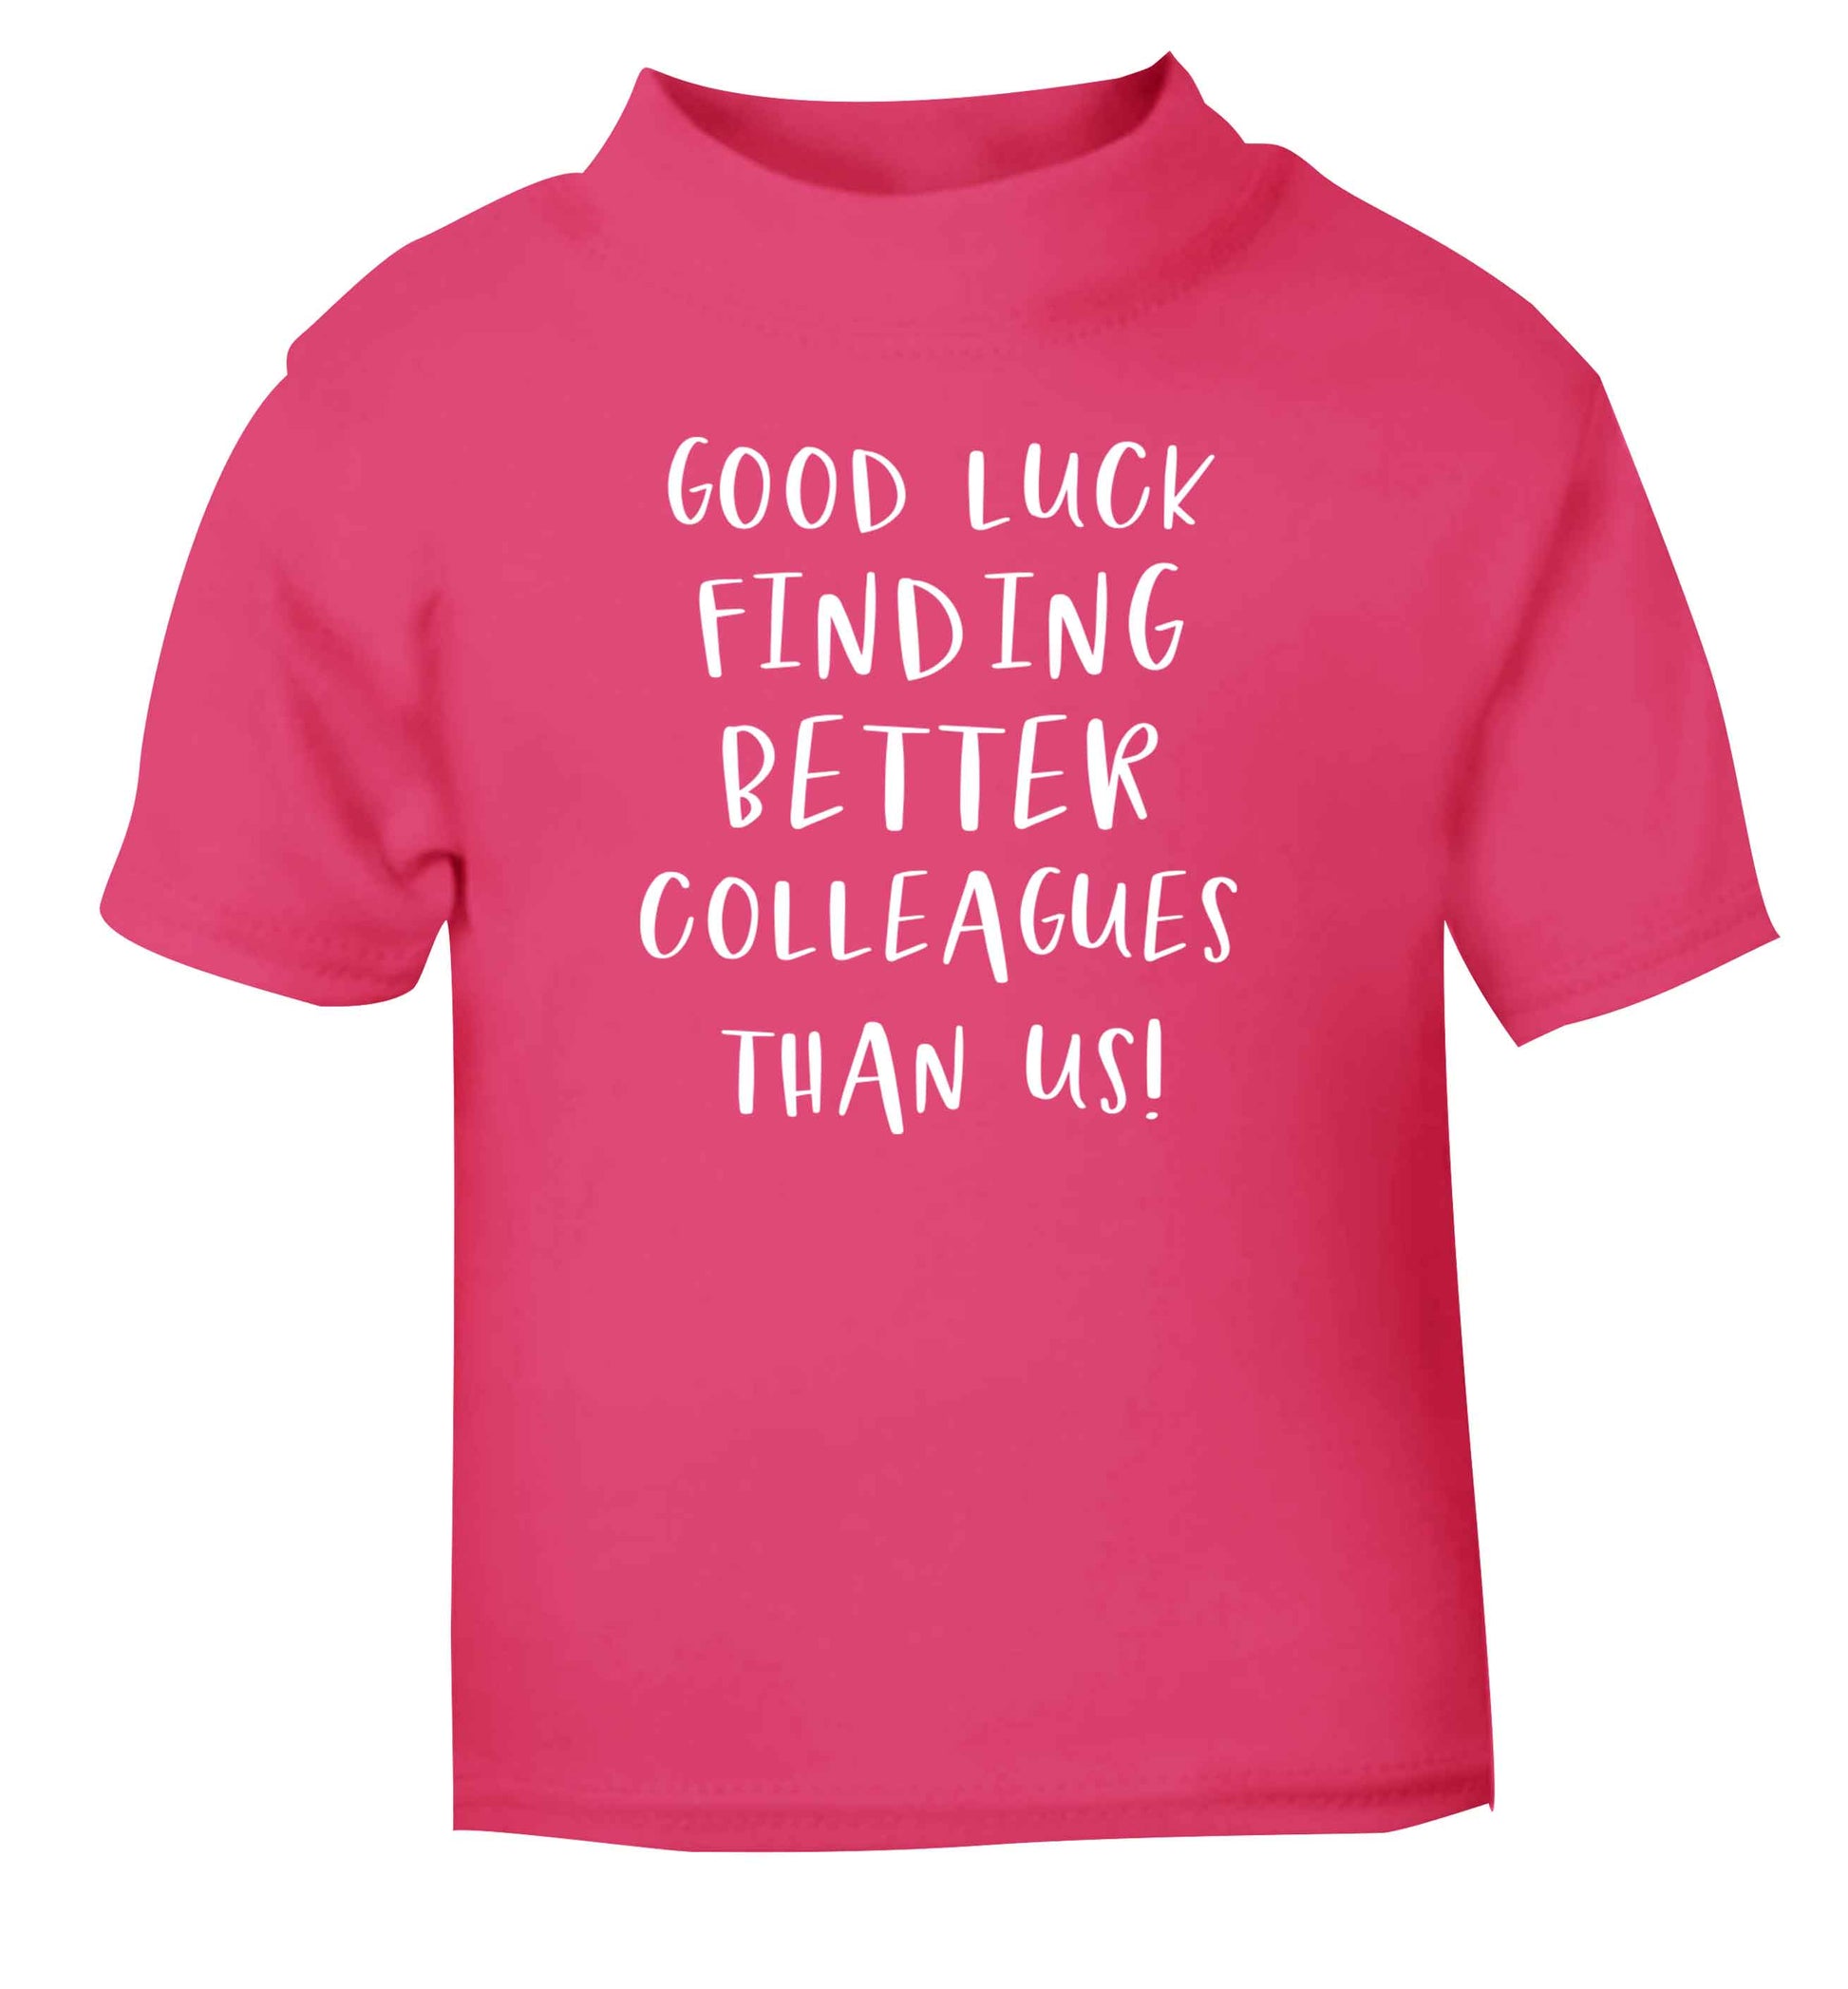 Good luck finding better colleagues than us! pink Baby Toddler Tshirt 2 Years